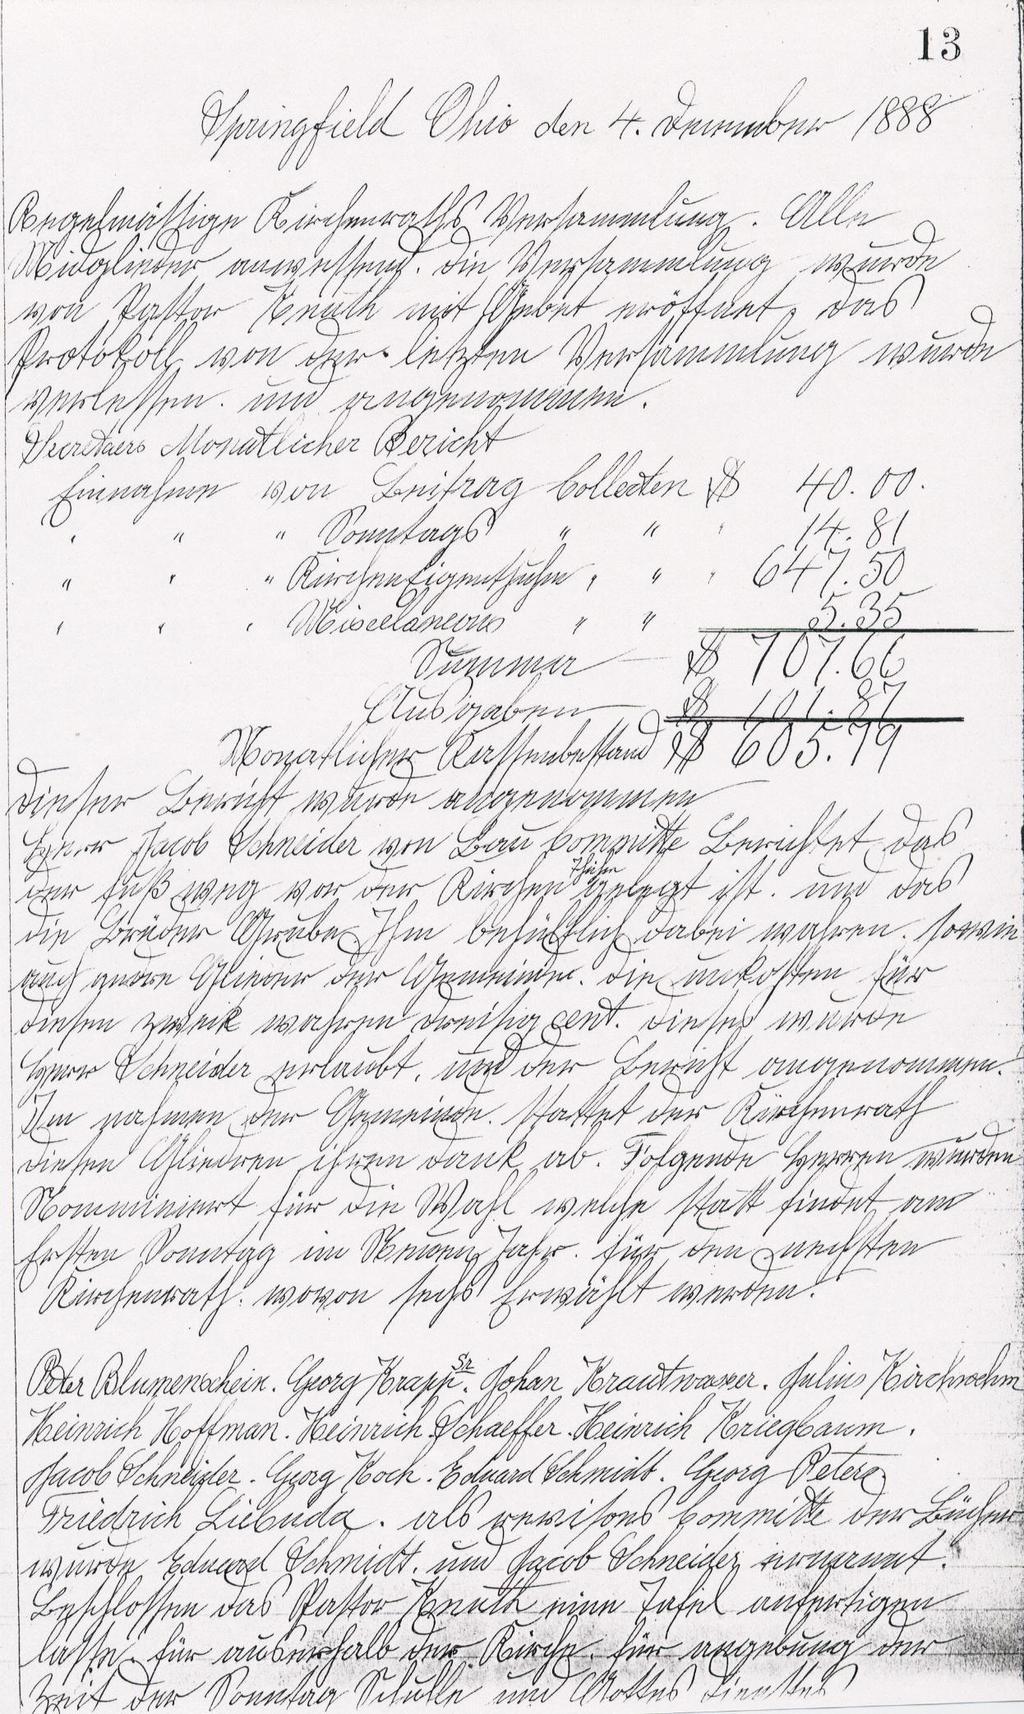 Page from the 1888 German records of St.